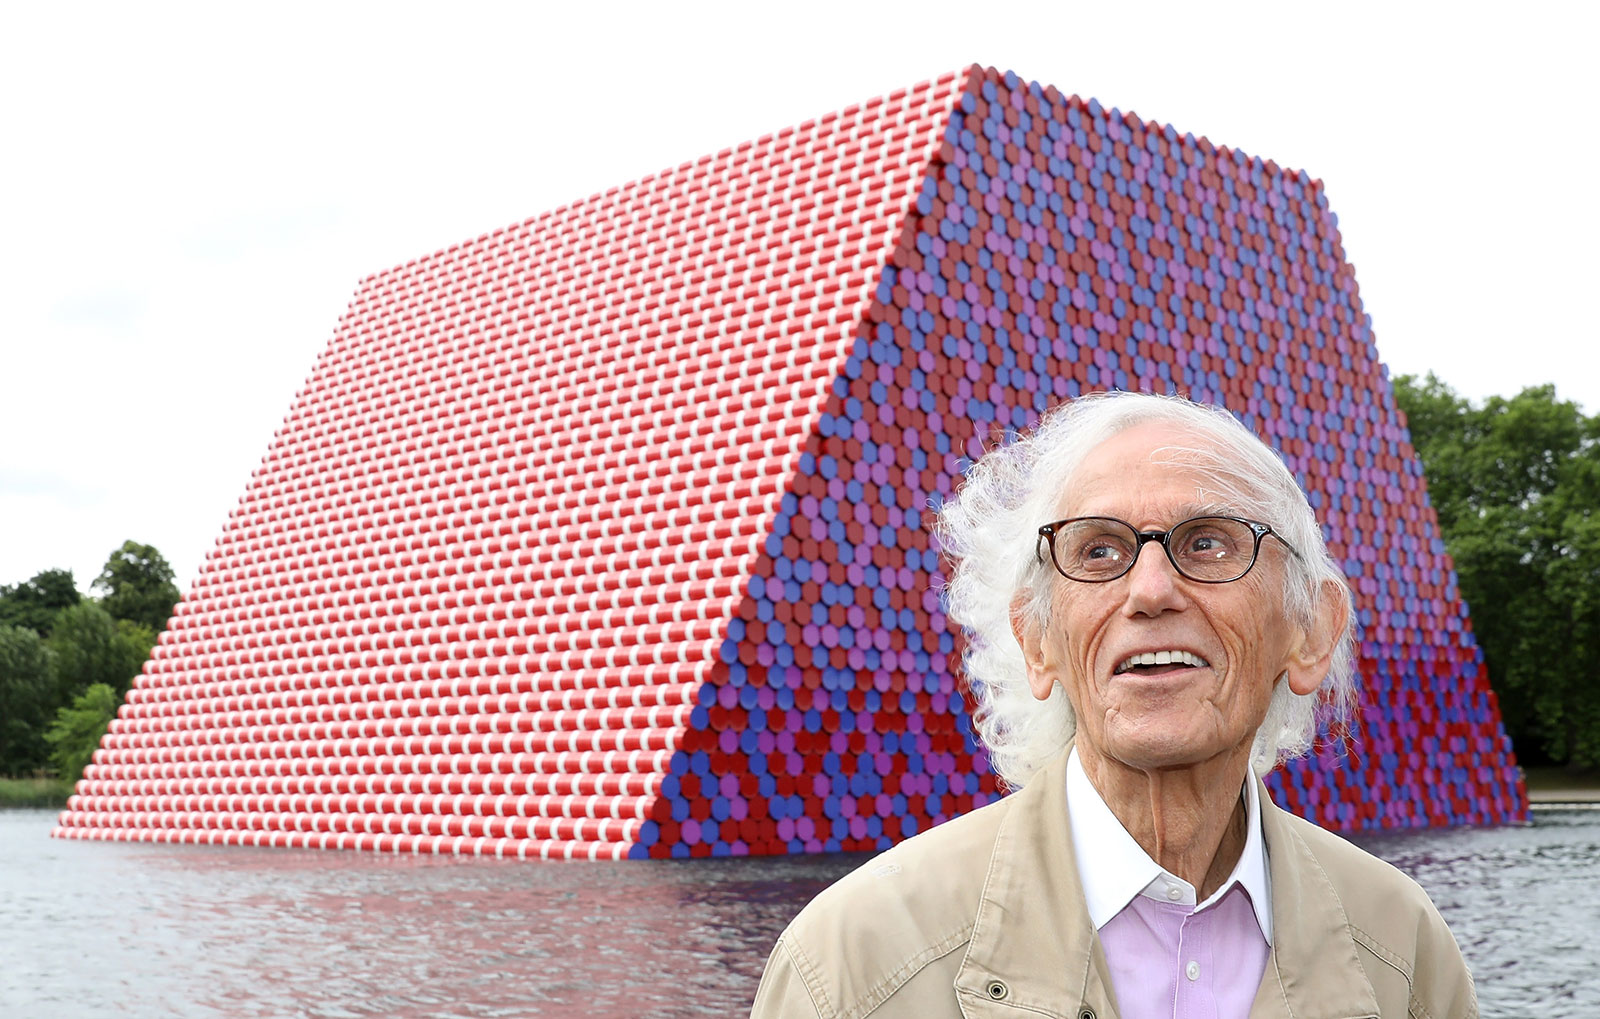 Christo pictured at the <em>London Mastaba,</em> 2018. Photography: Tim Whitby / Getty